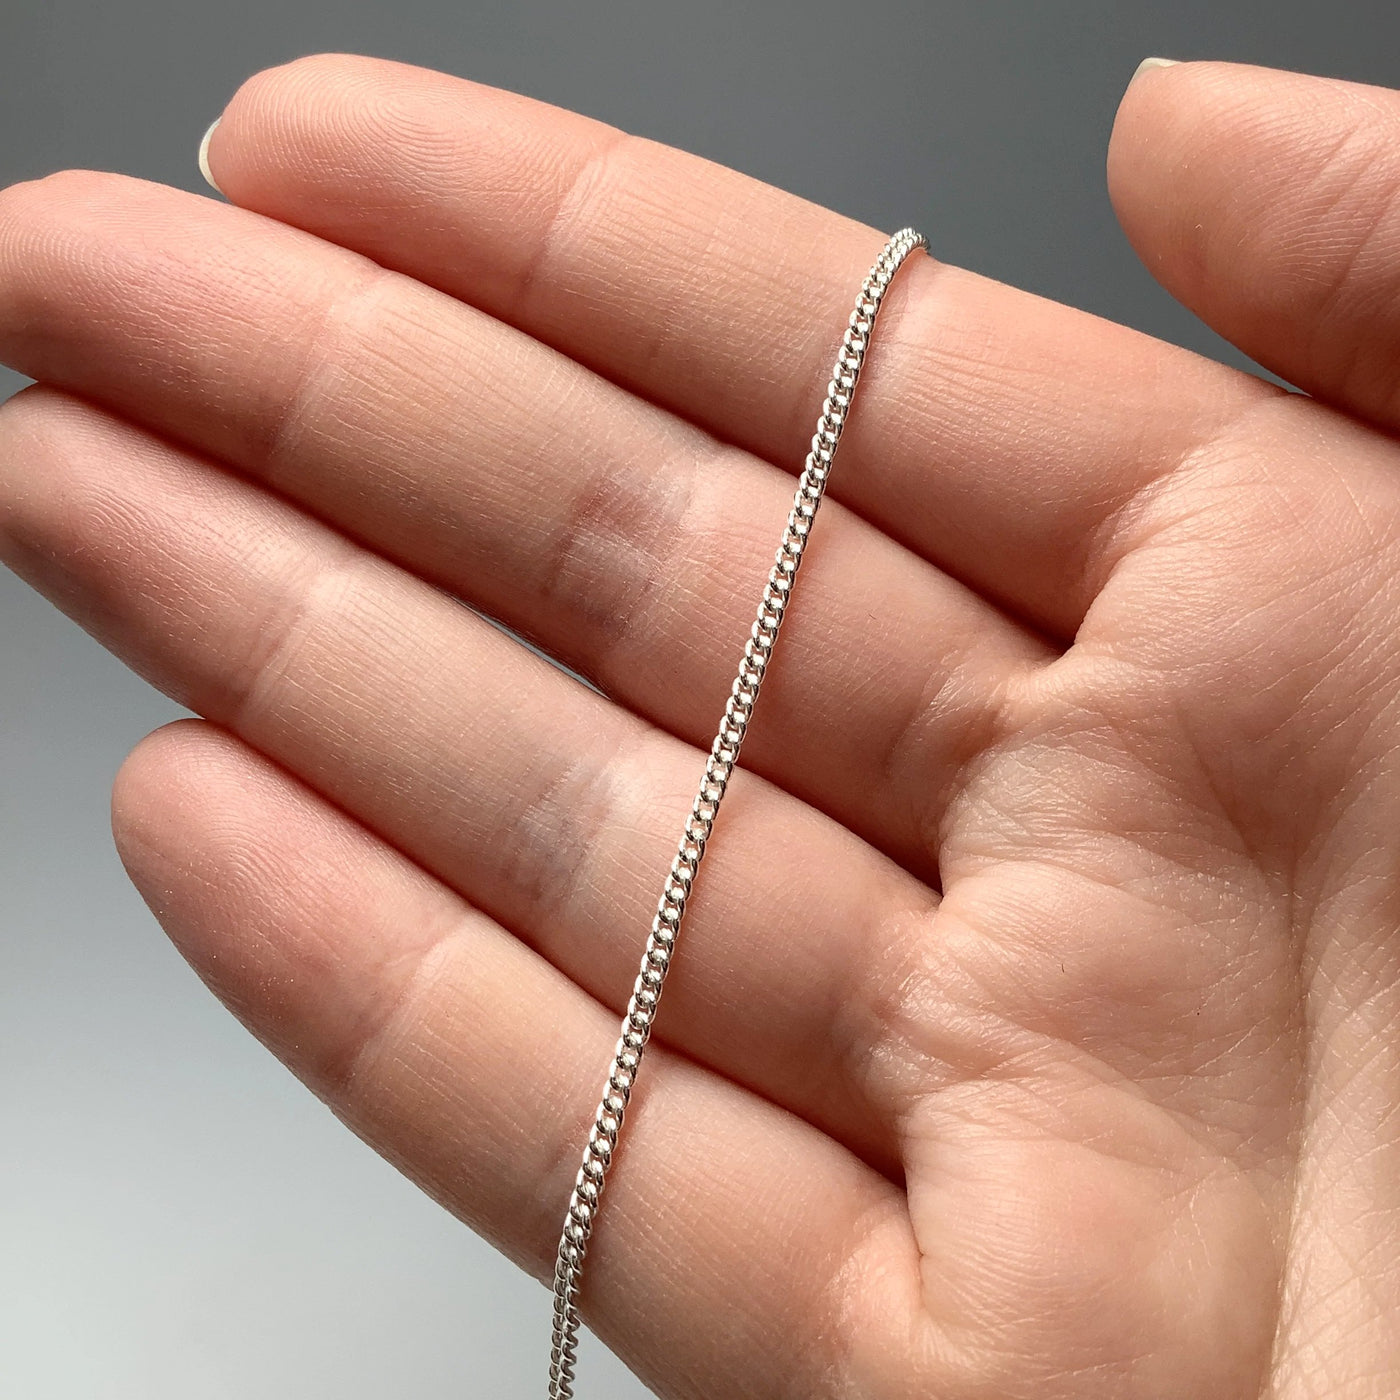 Sterling Silver Chain - Curb Link Style